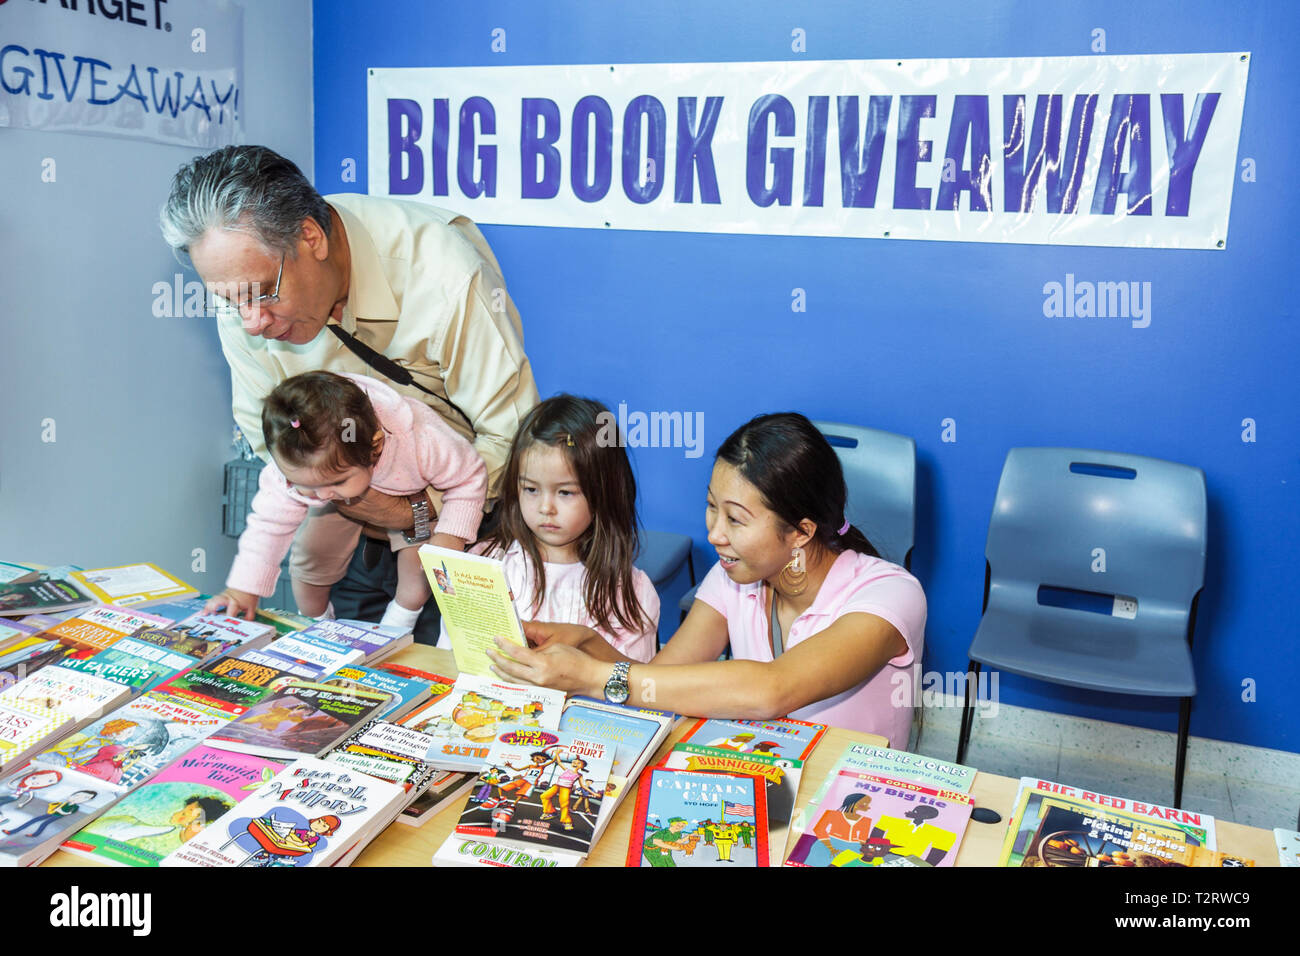 Florida Hollywood,Hollywood Branch Library,Children's BookFest,literature,book giveaway,Asian man men male,woman female women,girl girls,youngster,kid Stock Photo